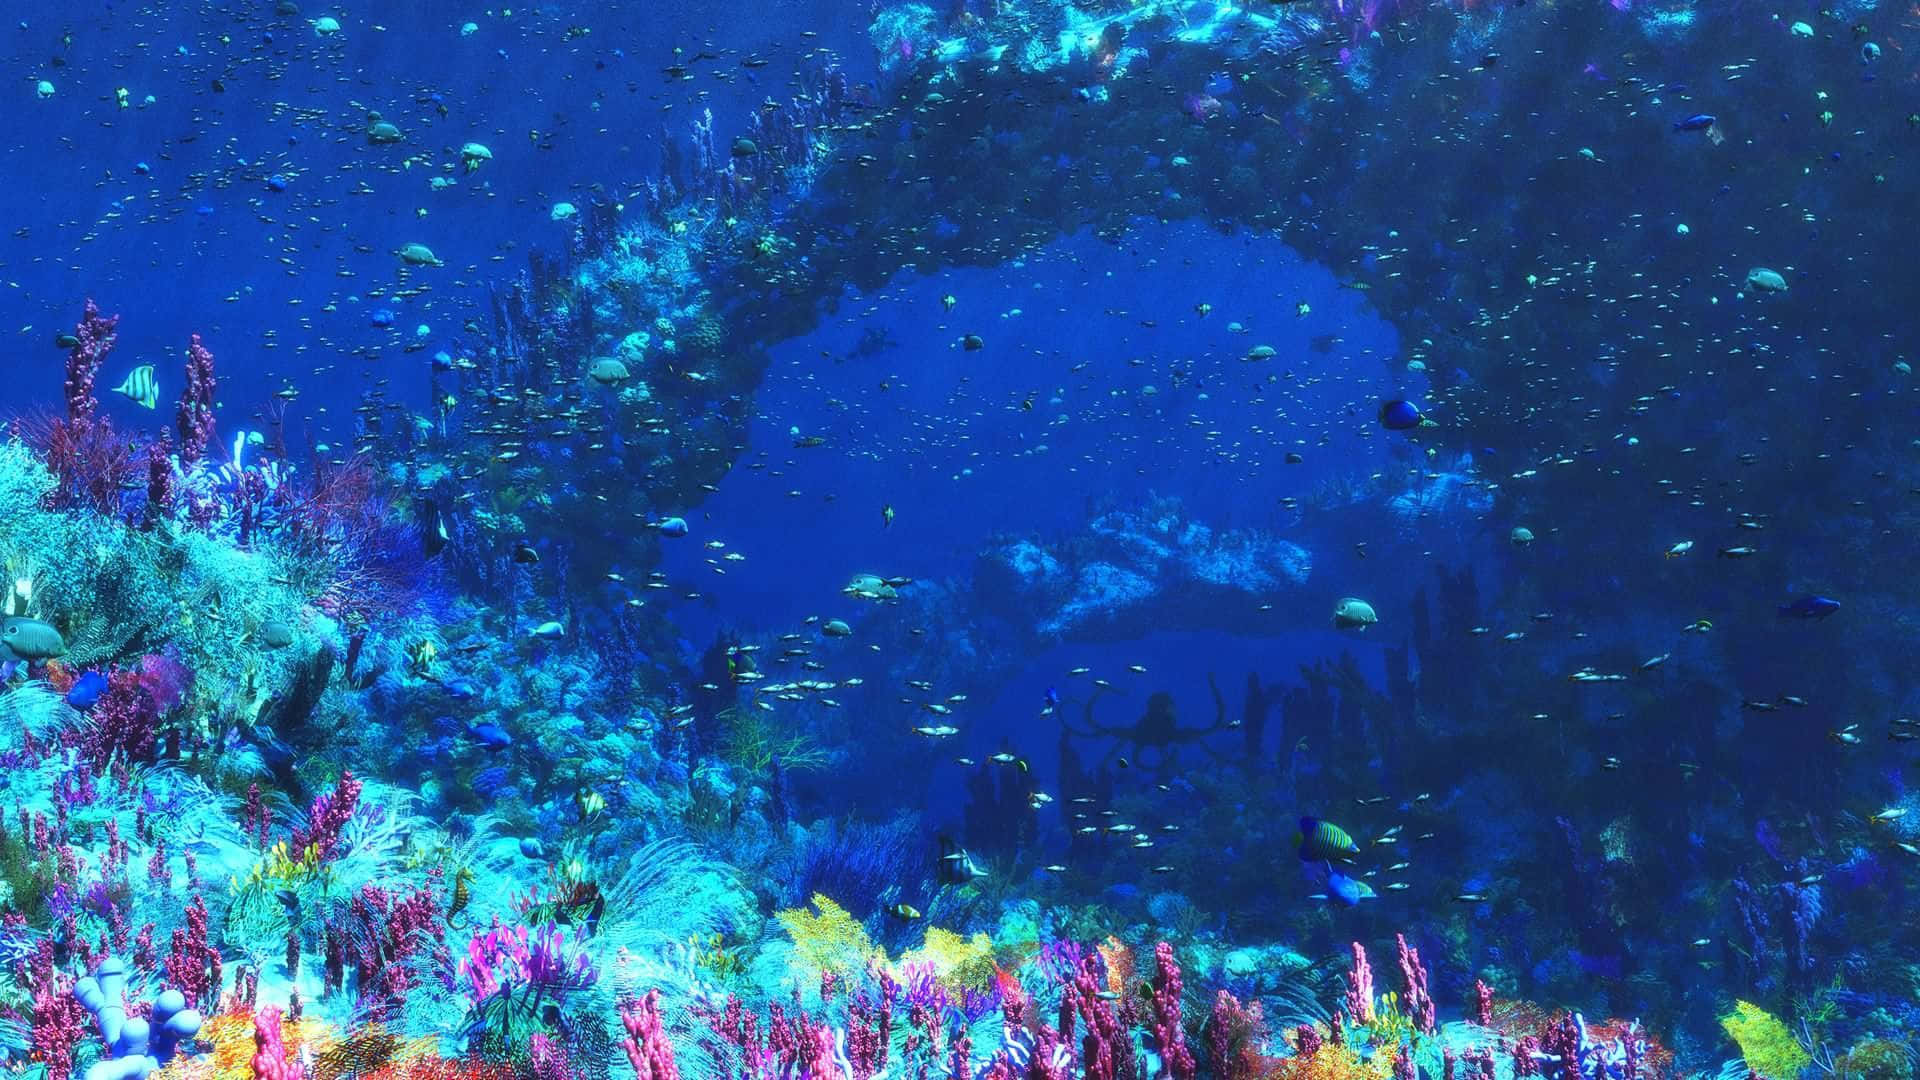 A Colorful Underwater Scene With Corals And Fish